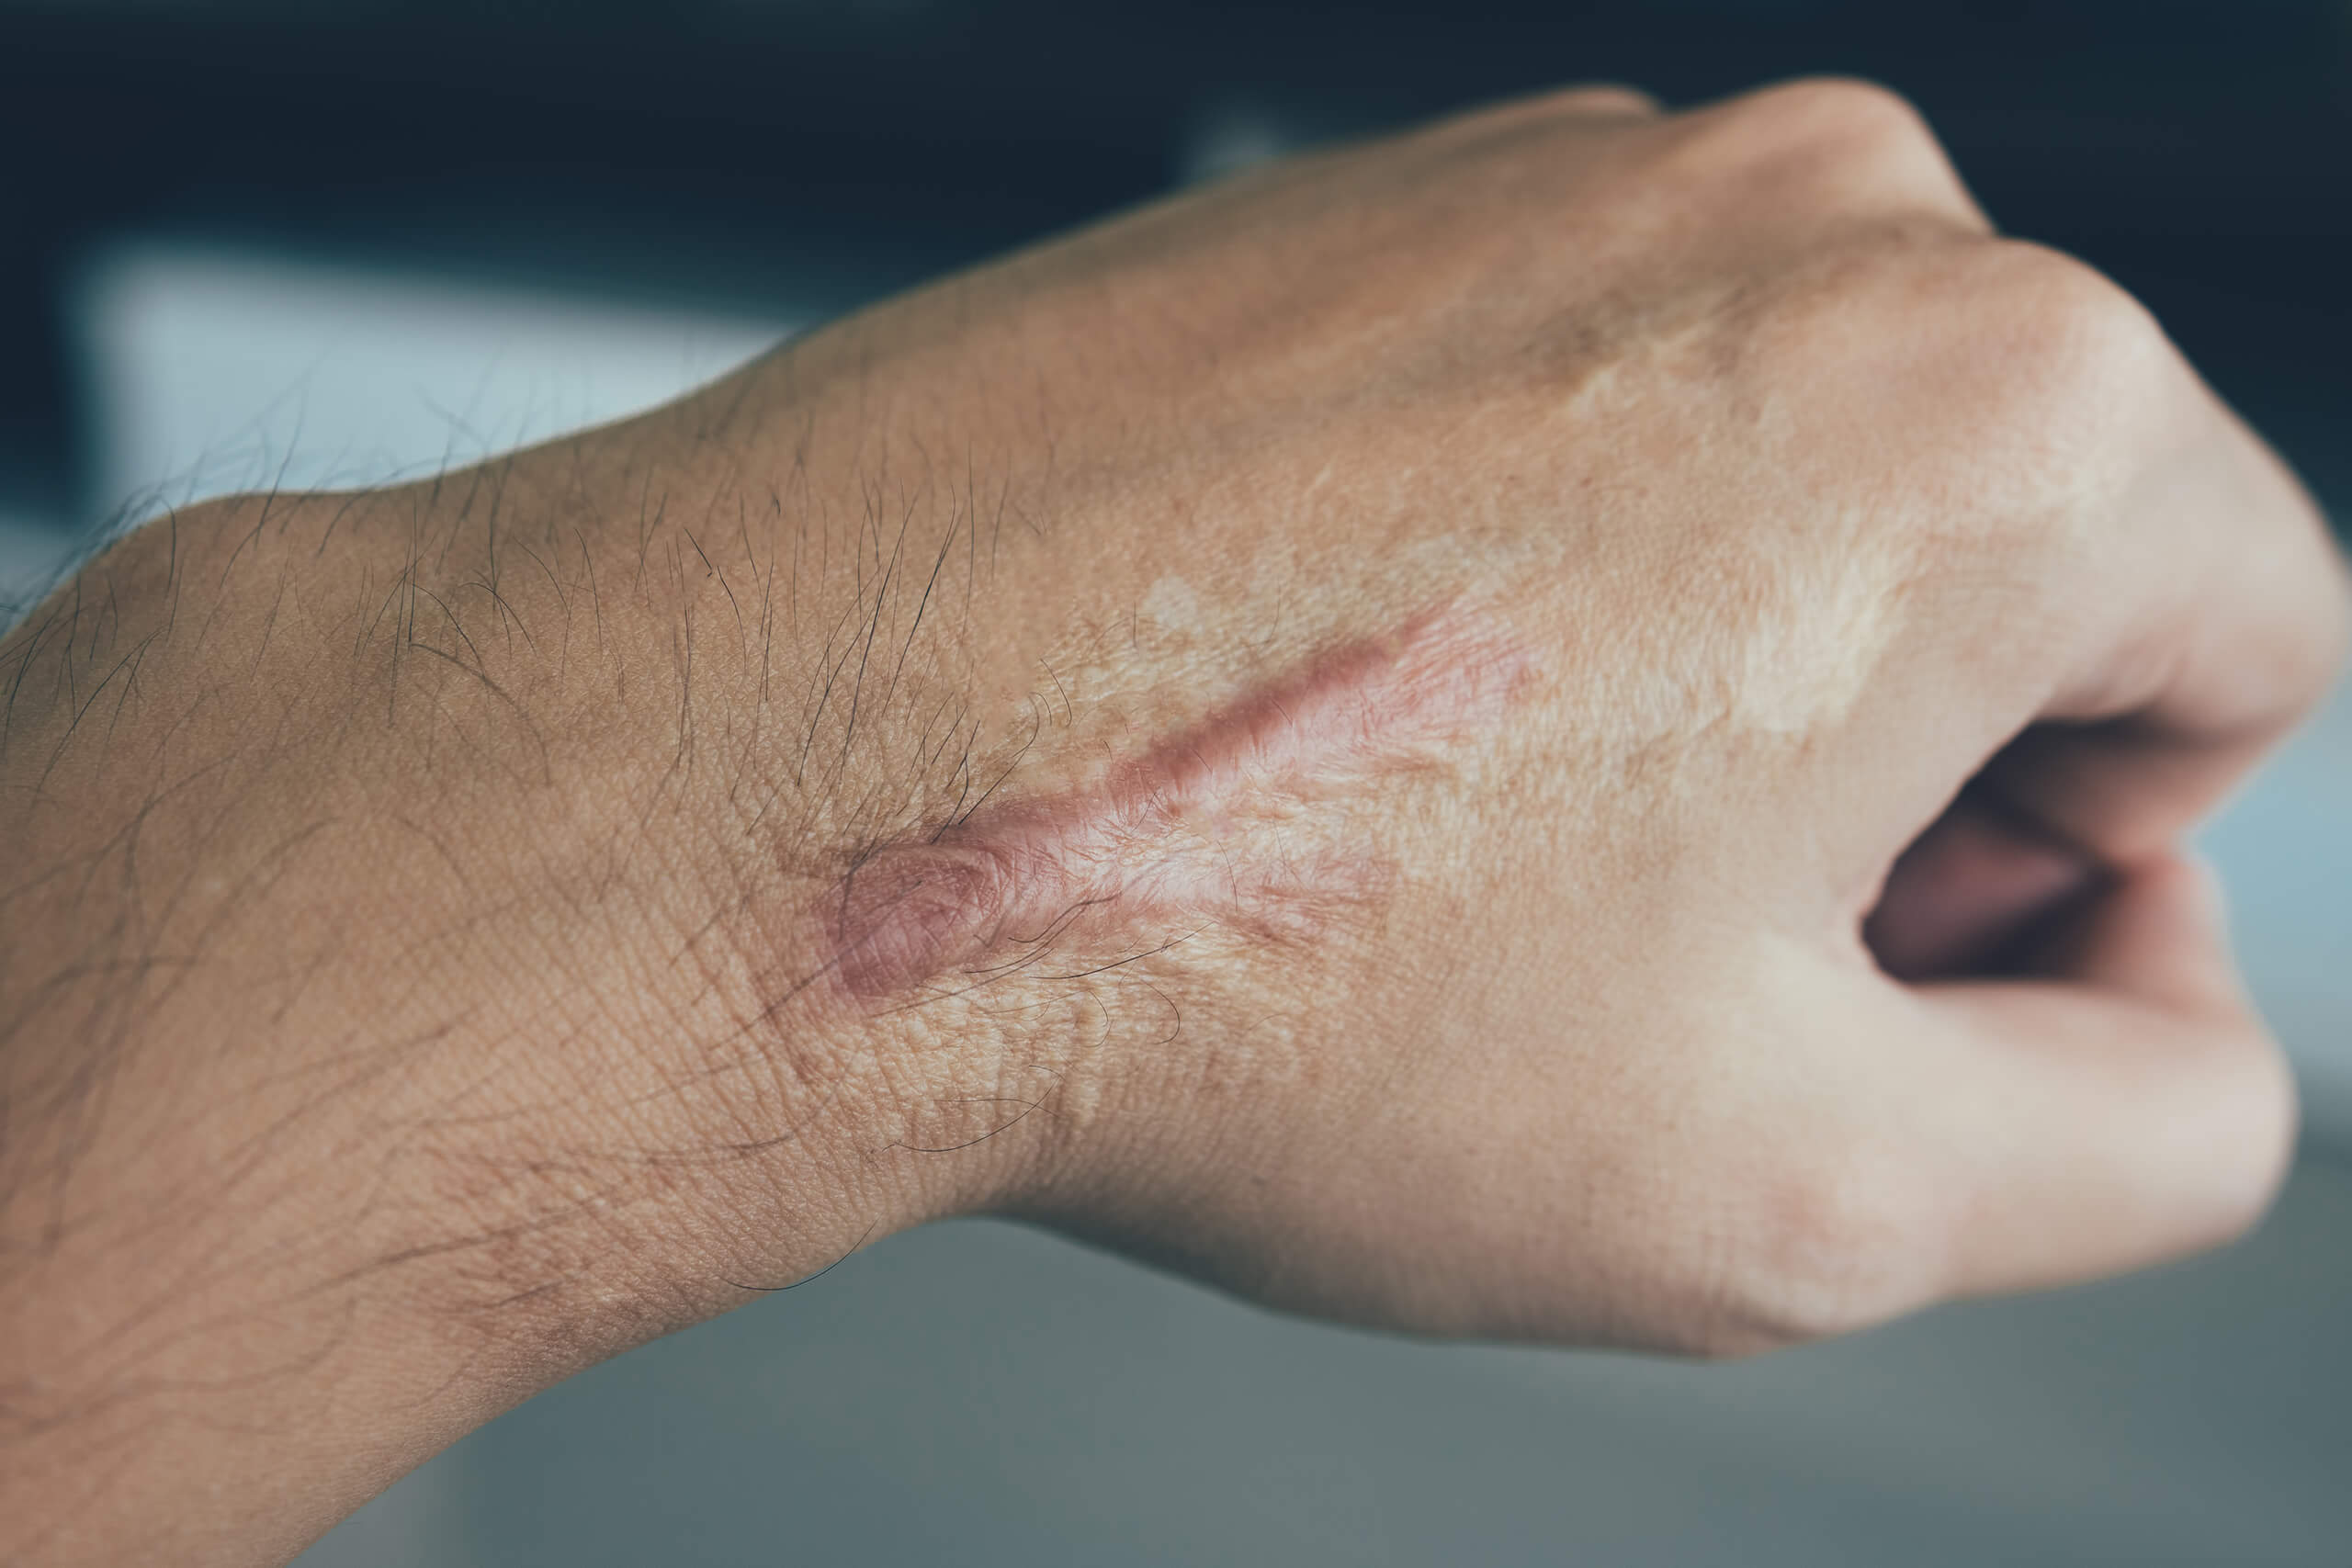 Scar Removal & Treatment, Hand Scar Removal